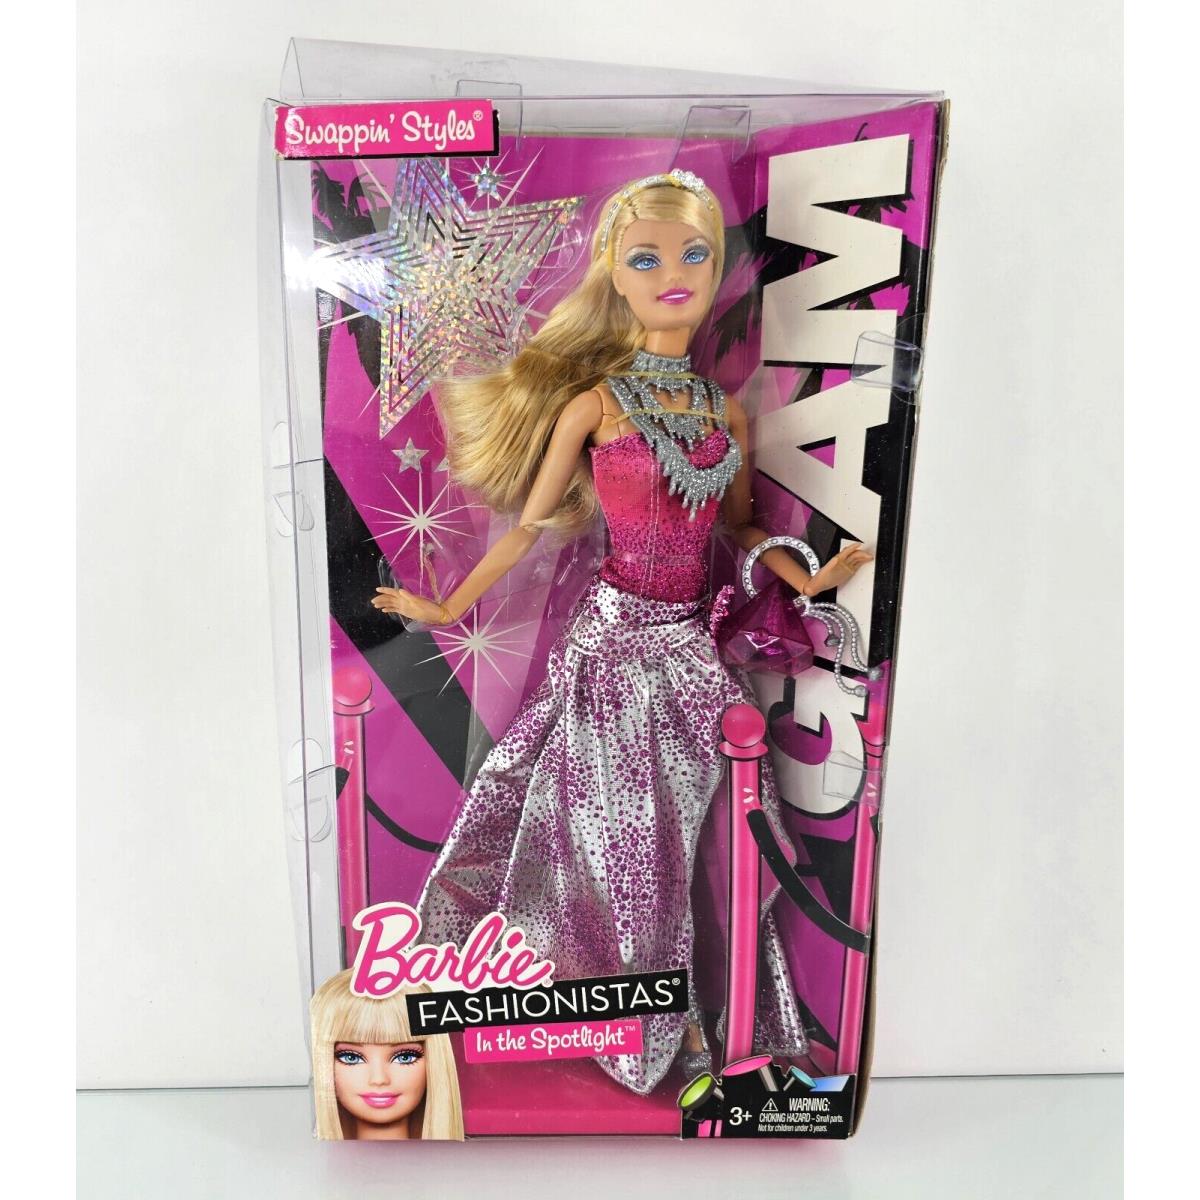 Barbie Fashionistas Glam Doll V4390 Swappin` Styles In The Spotlight Mattel 2010